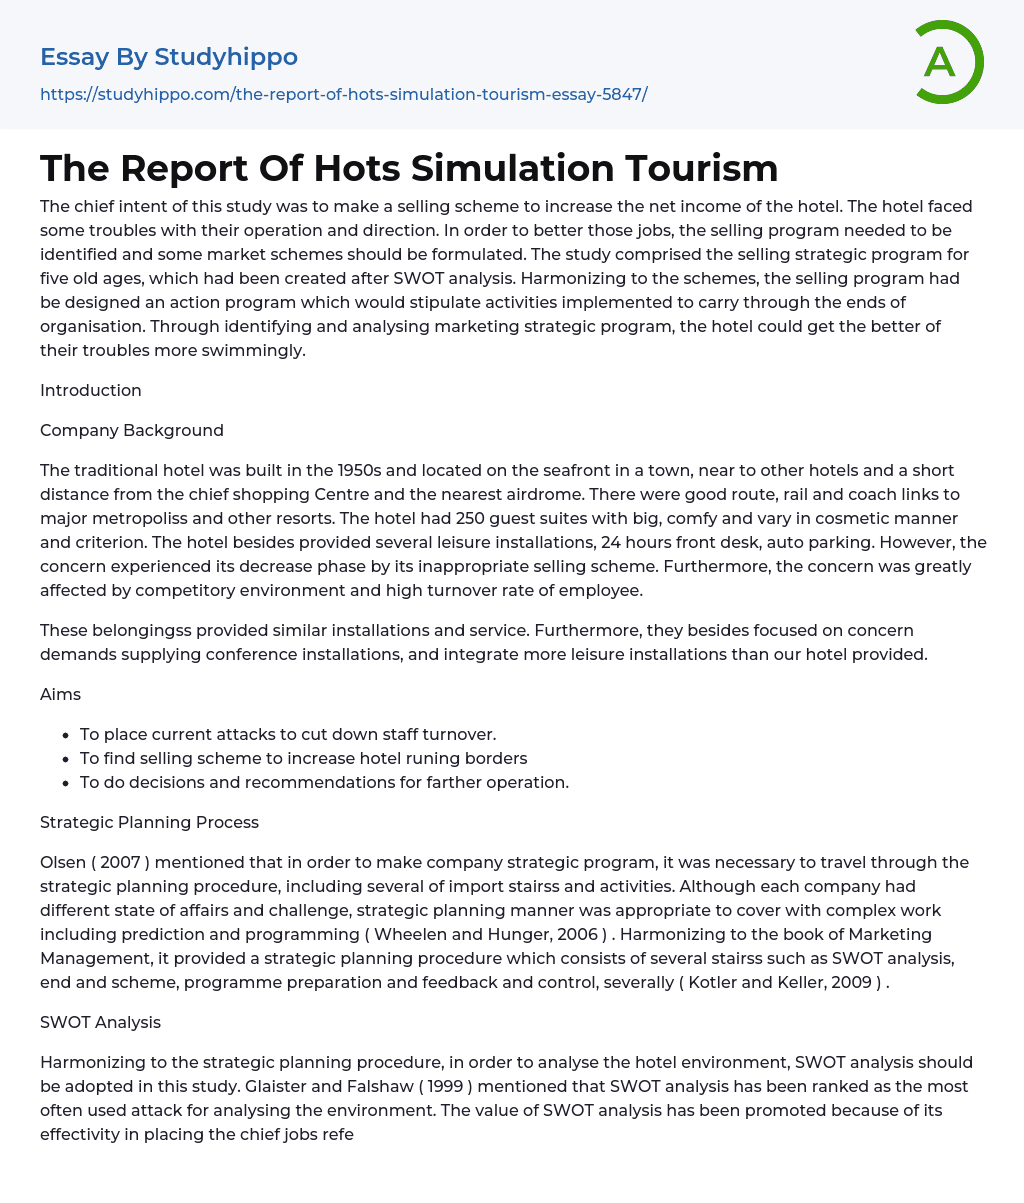 The Report Of Hots Simulation Tourism